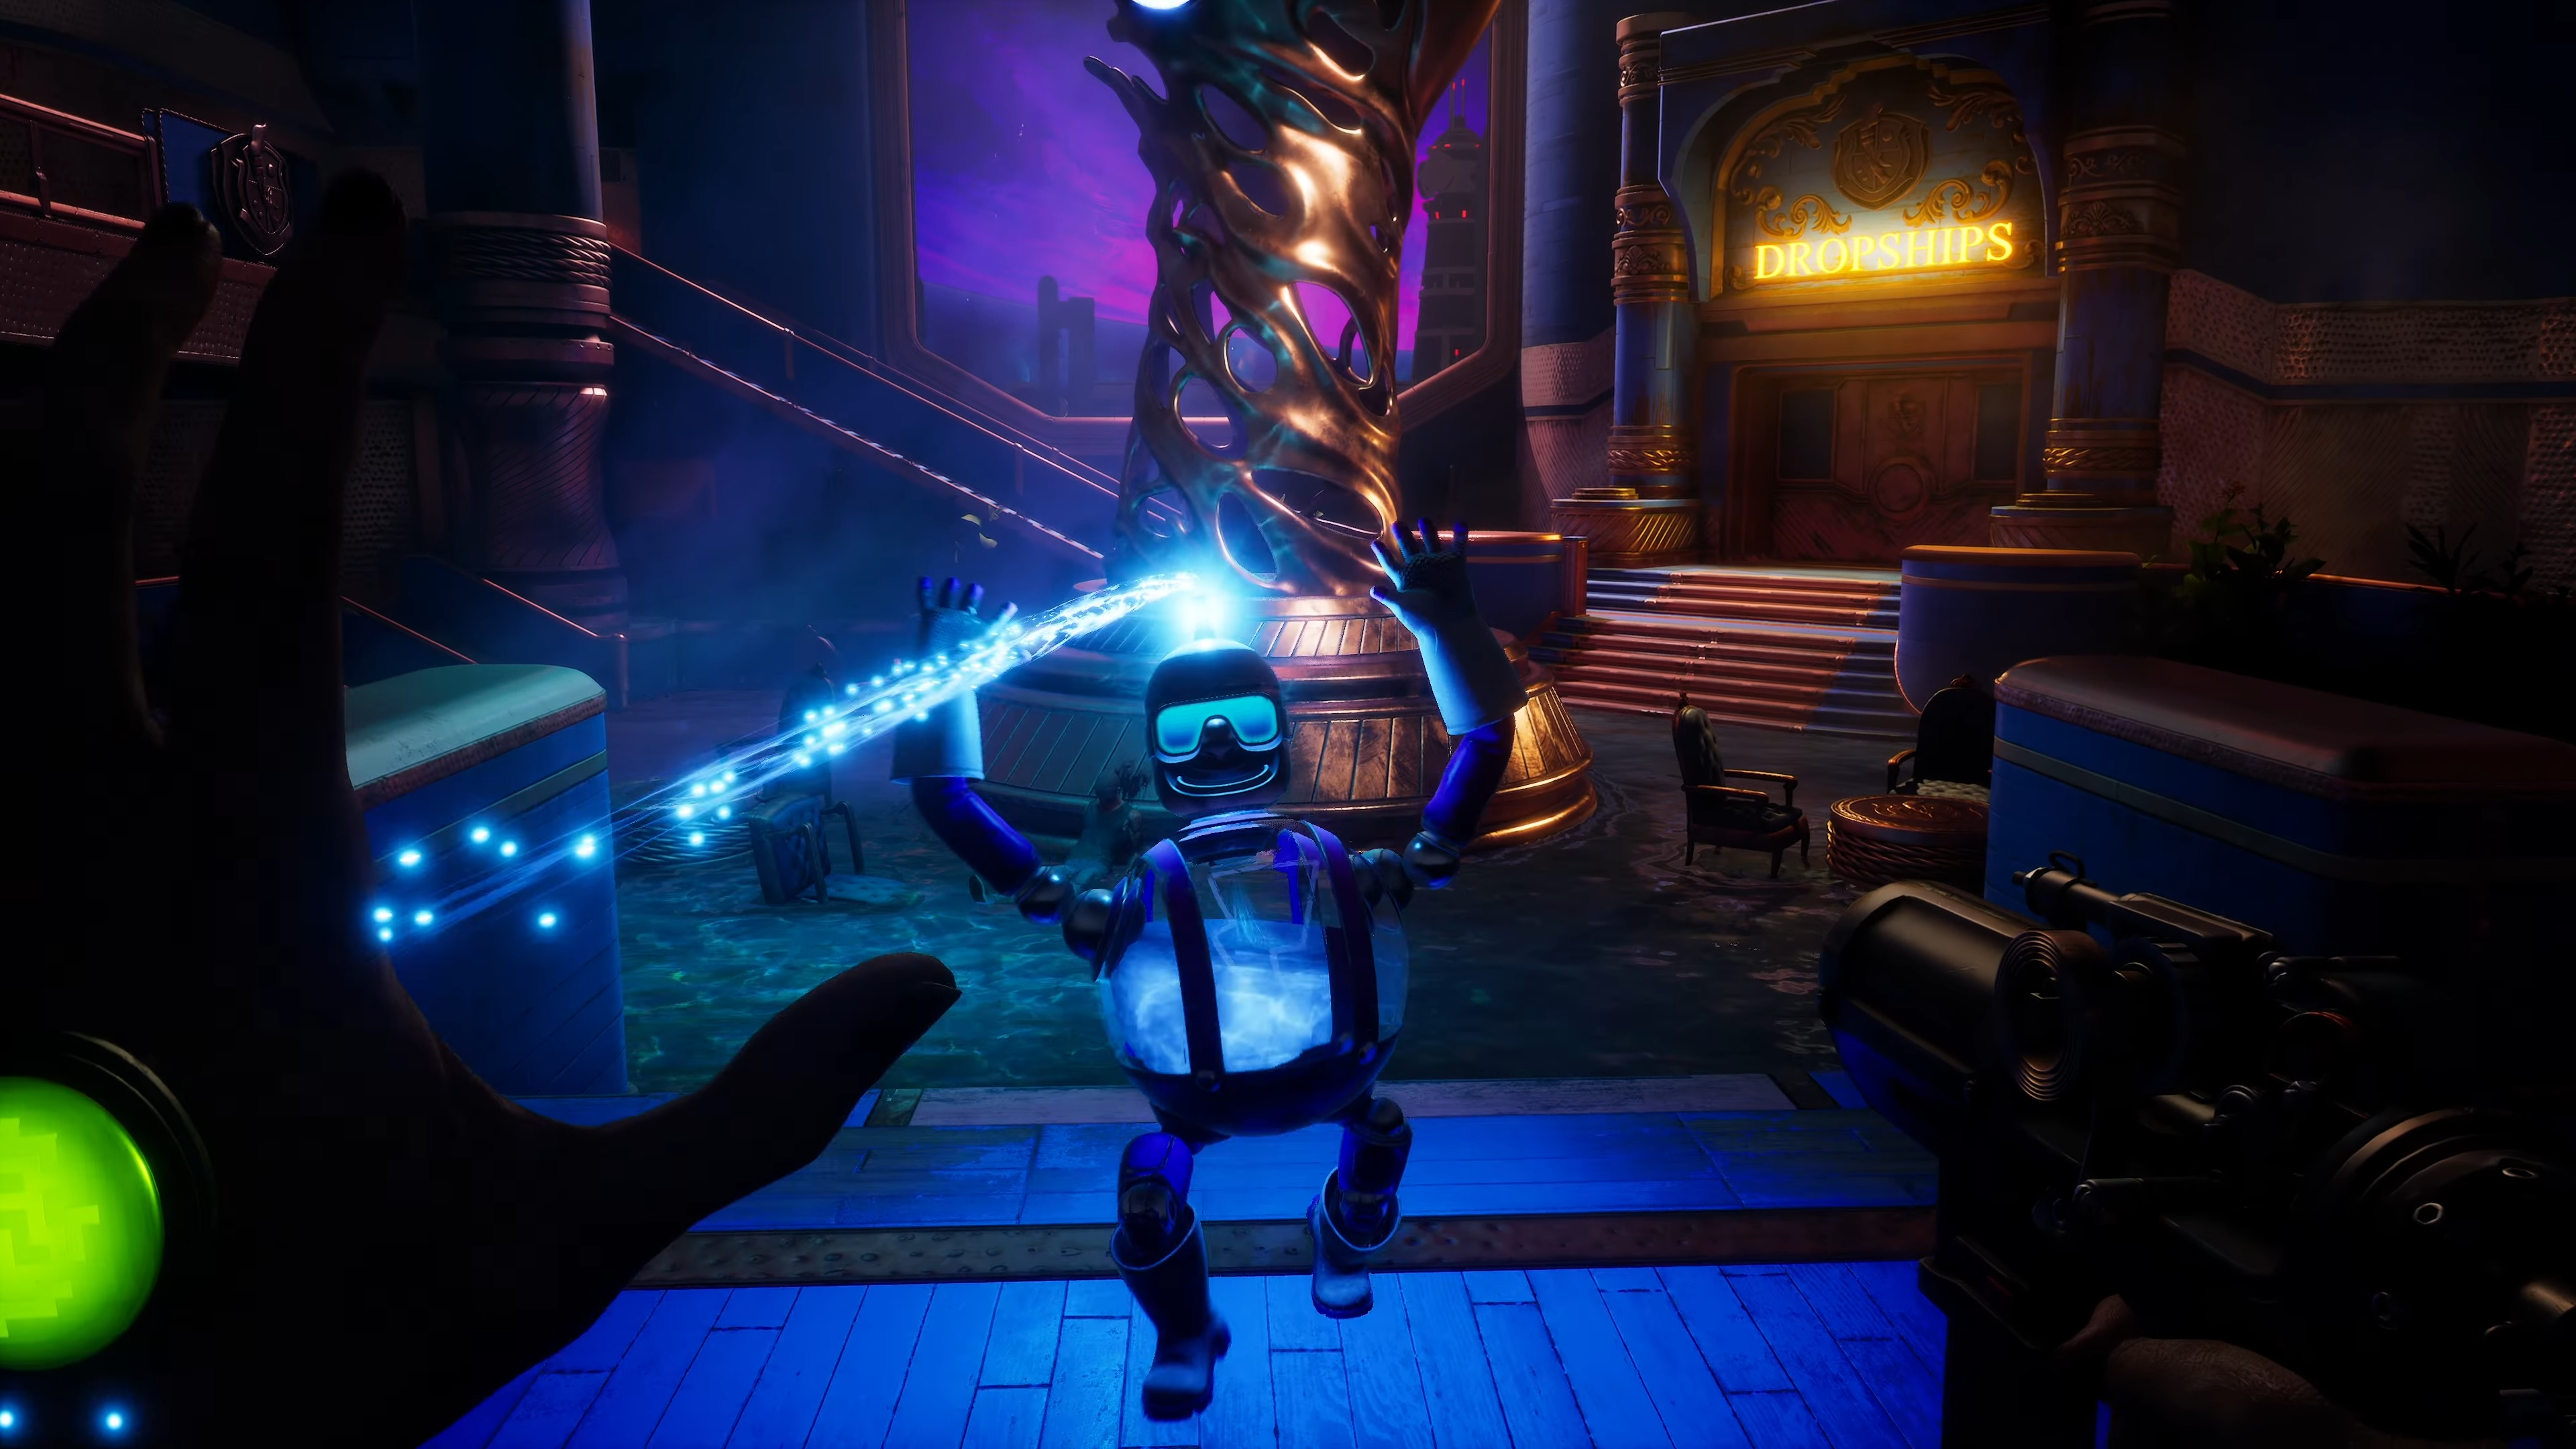 The title character of Judas fights a little rotund robot with her in-built hand weapons, against a steampunky indoor backdrop.